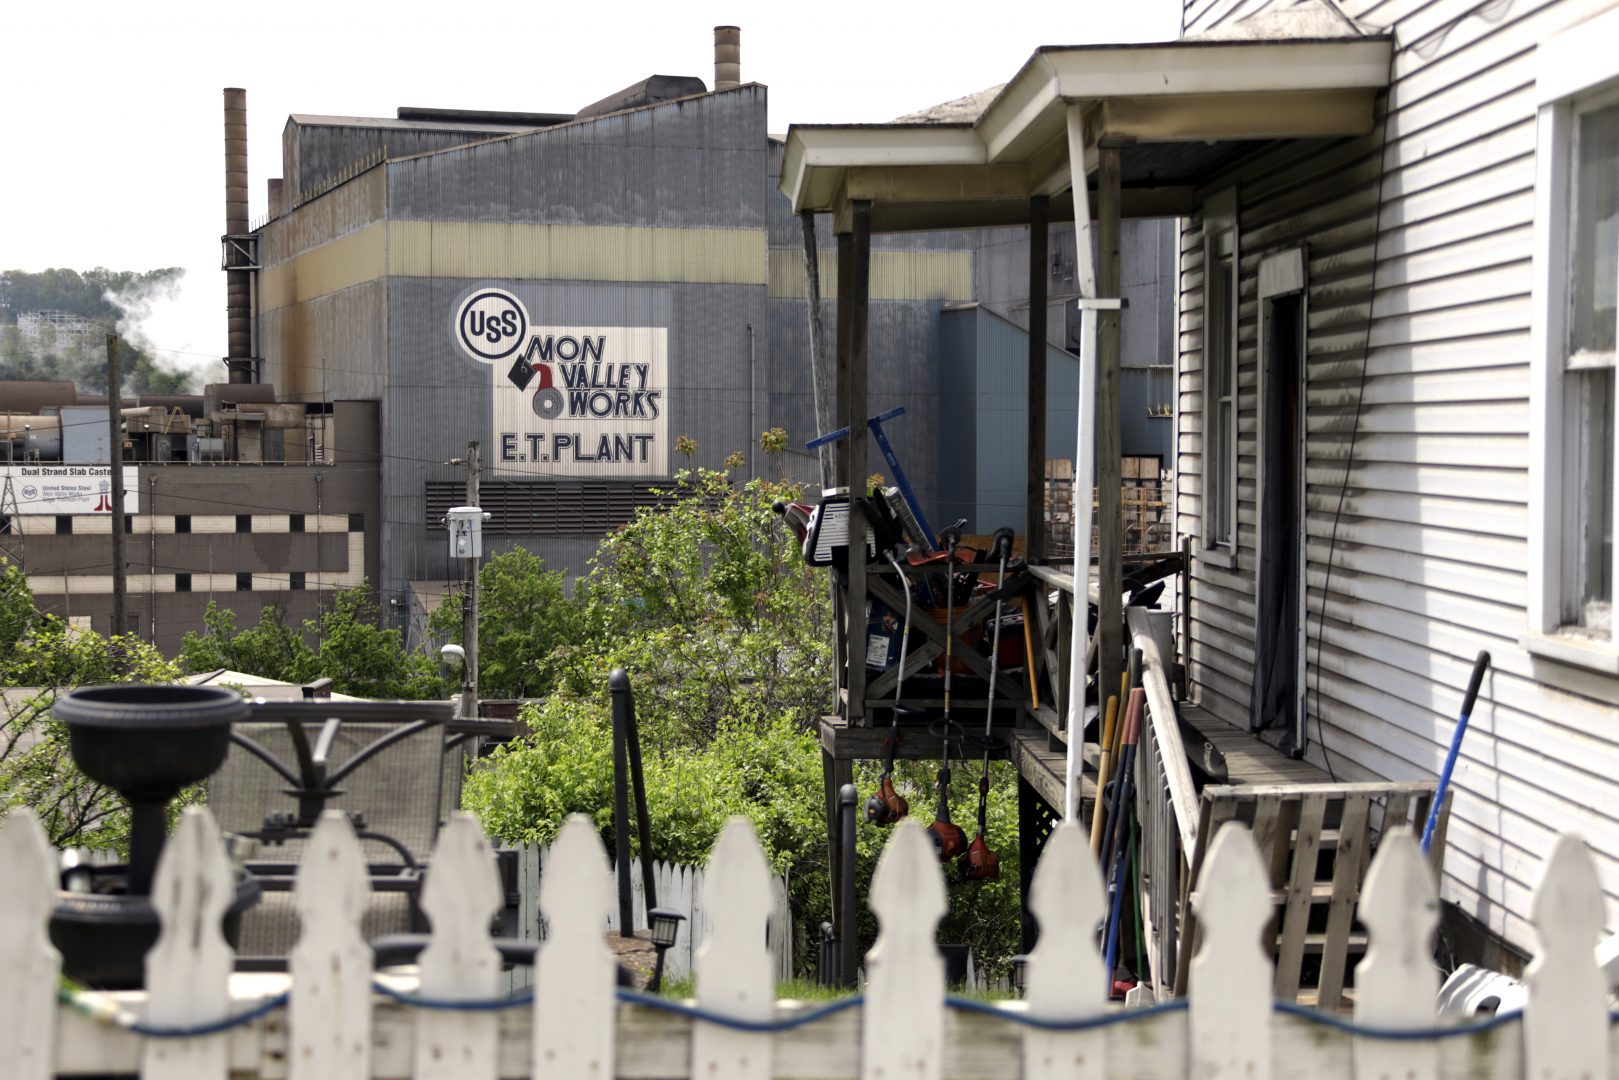 Part of the U.S. Steel FILE PHOTO: Edgar Thomson Works in Braddock, Pa. is seen from a yard overlooking the plant on Thursday, May 2, 2019. U.S. Steel  said on Friday, April 30, 2021, that it is canceling a $1.5 billion project to bring a state-of-the-art improvement to its Mon Valley Works operations in western Pennsylvania.